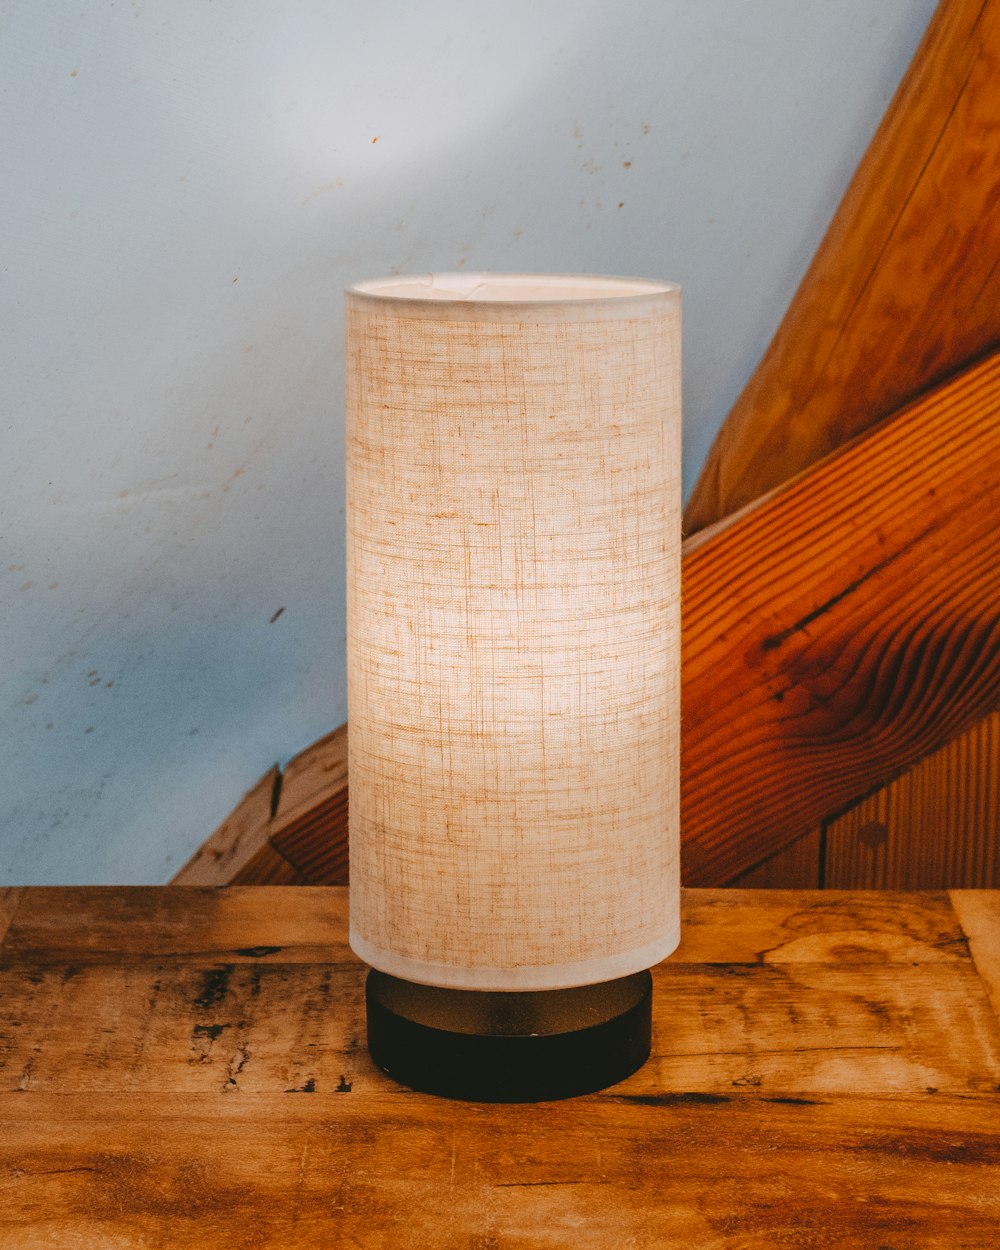 a lamp is sitting on a wooden table